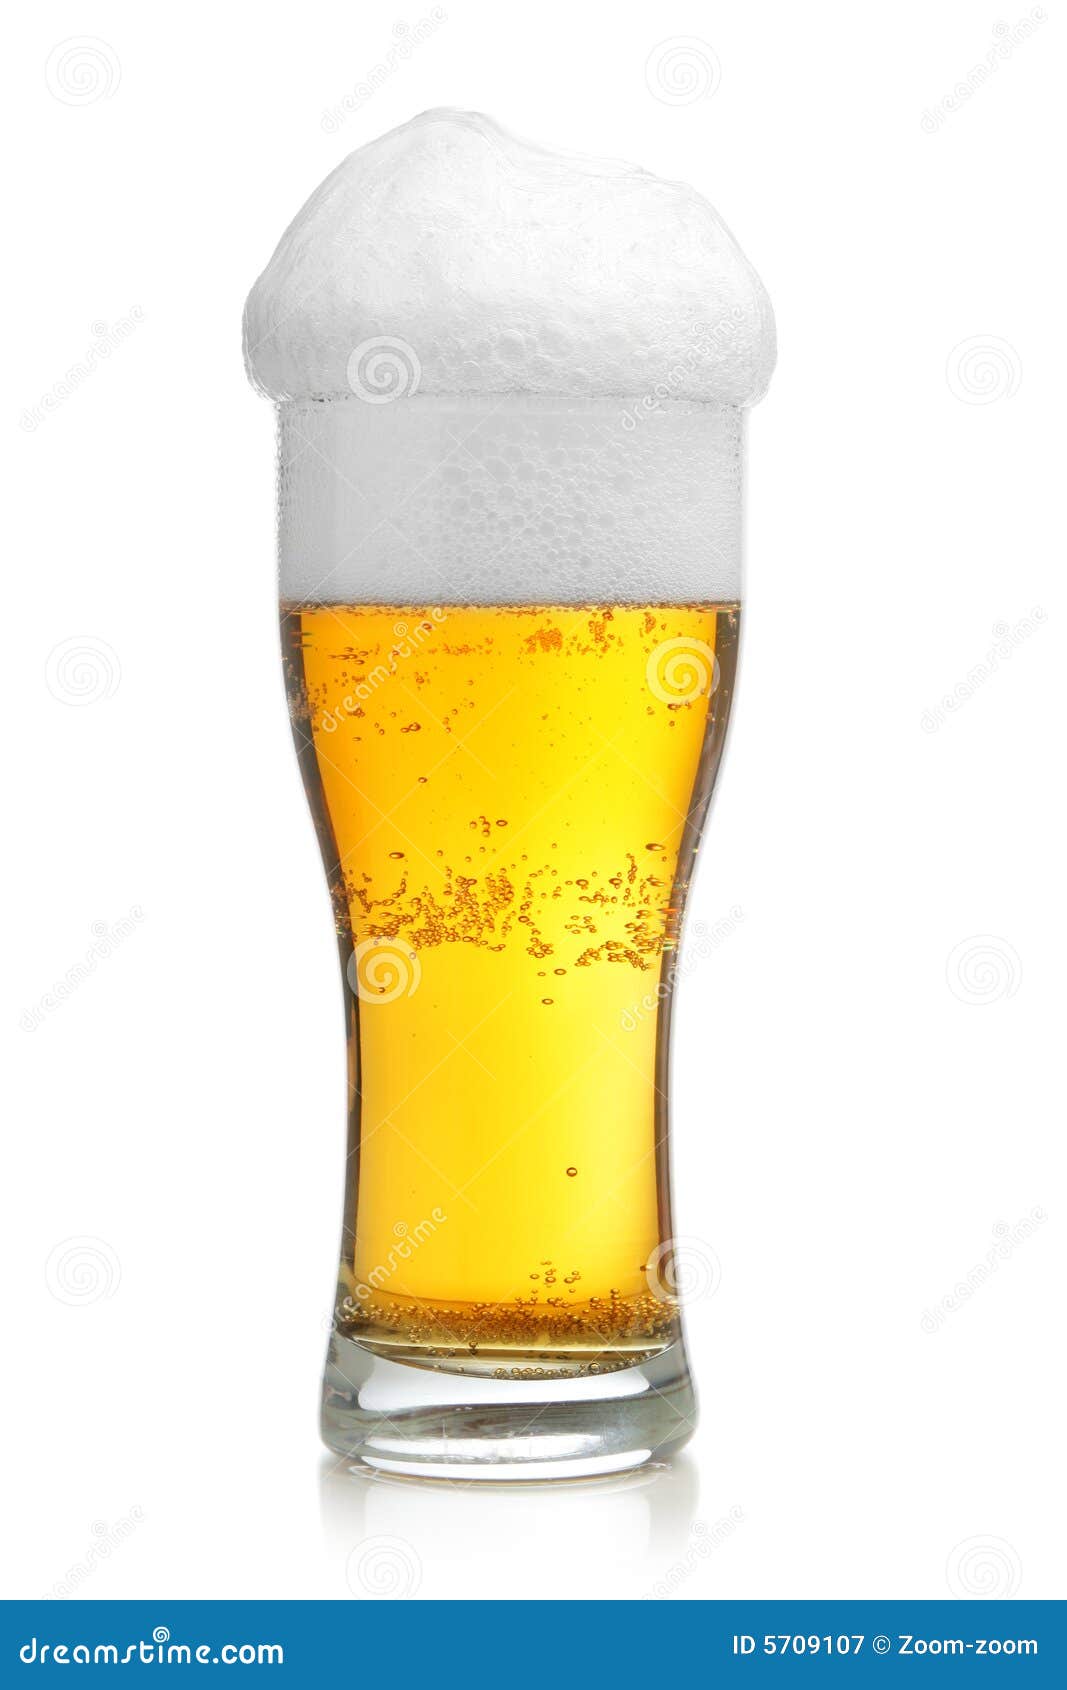 glass of beer with froth